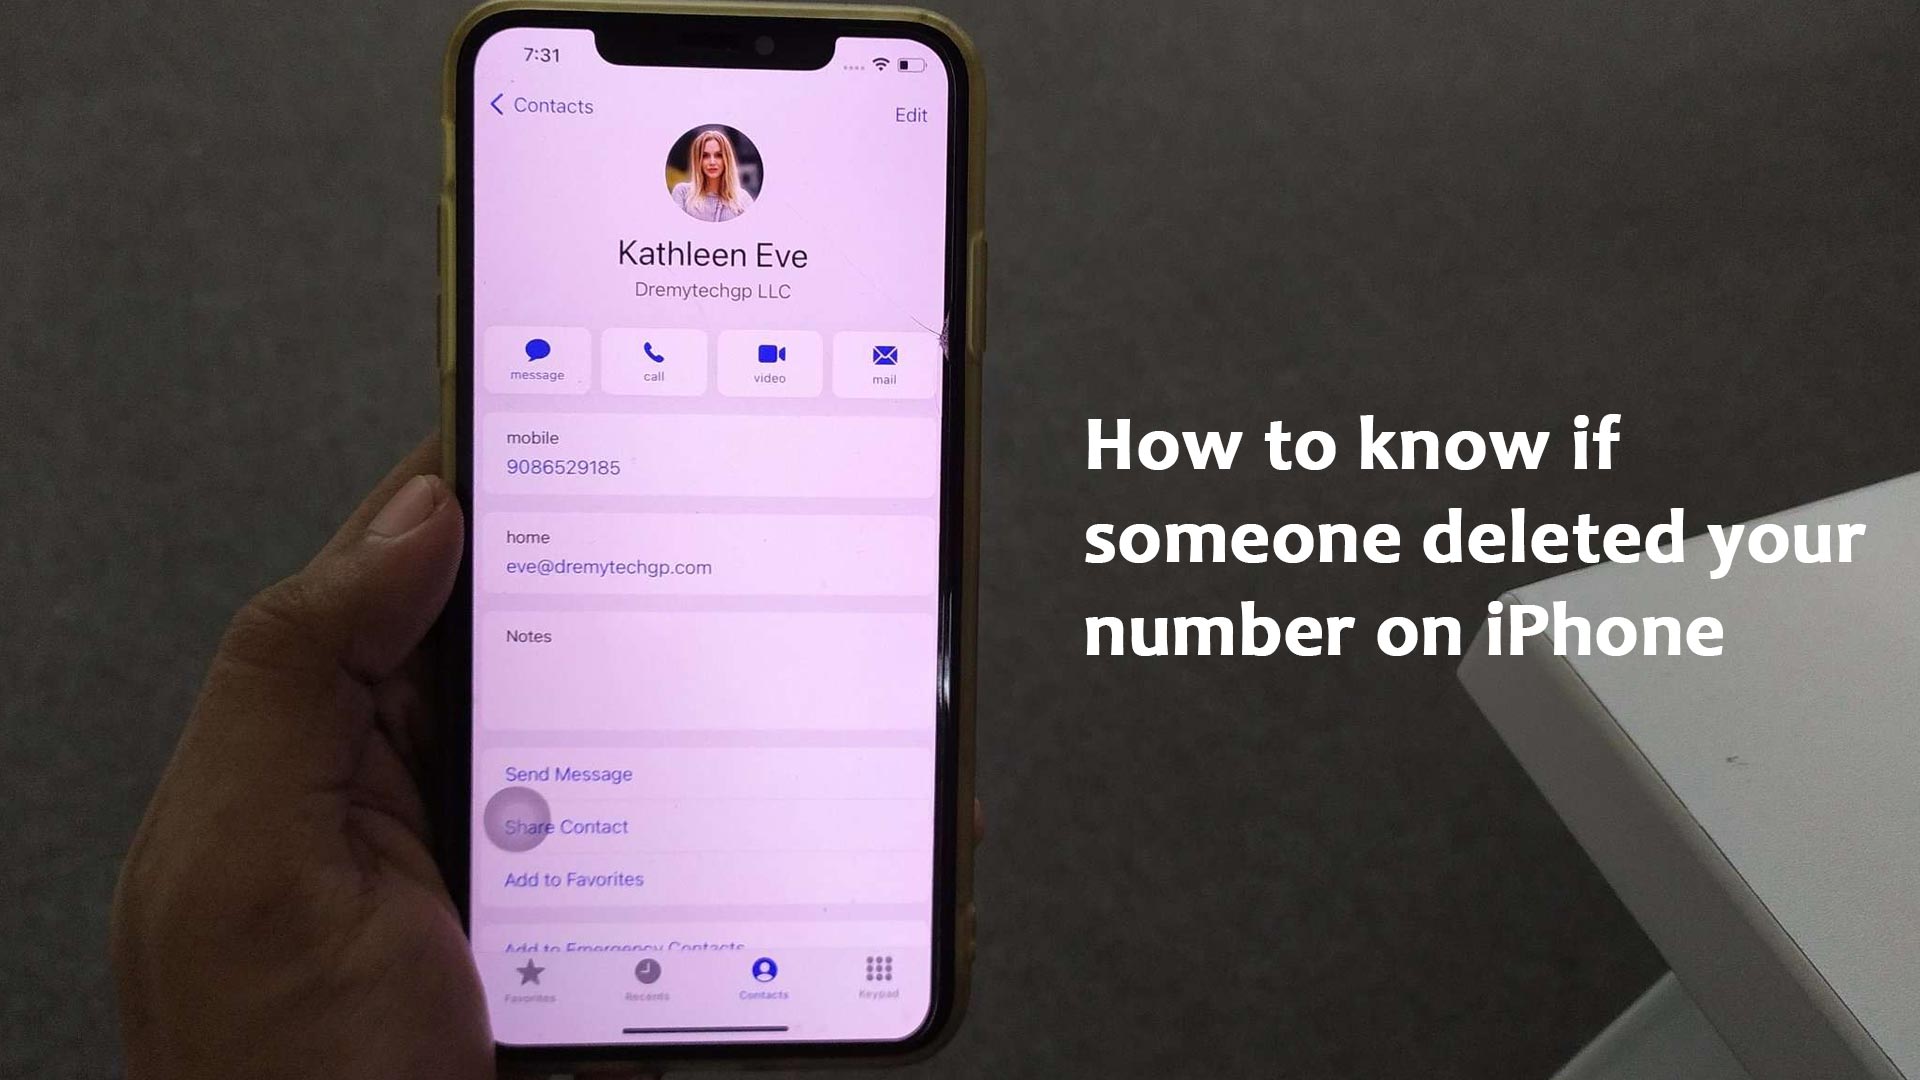 How to know if someone deleted your number on iPhone